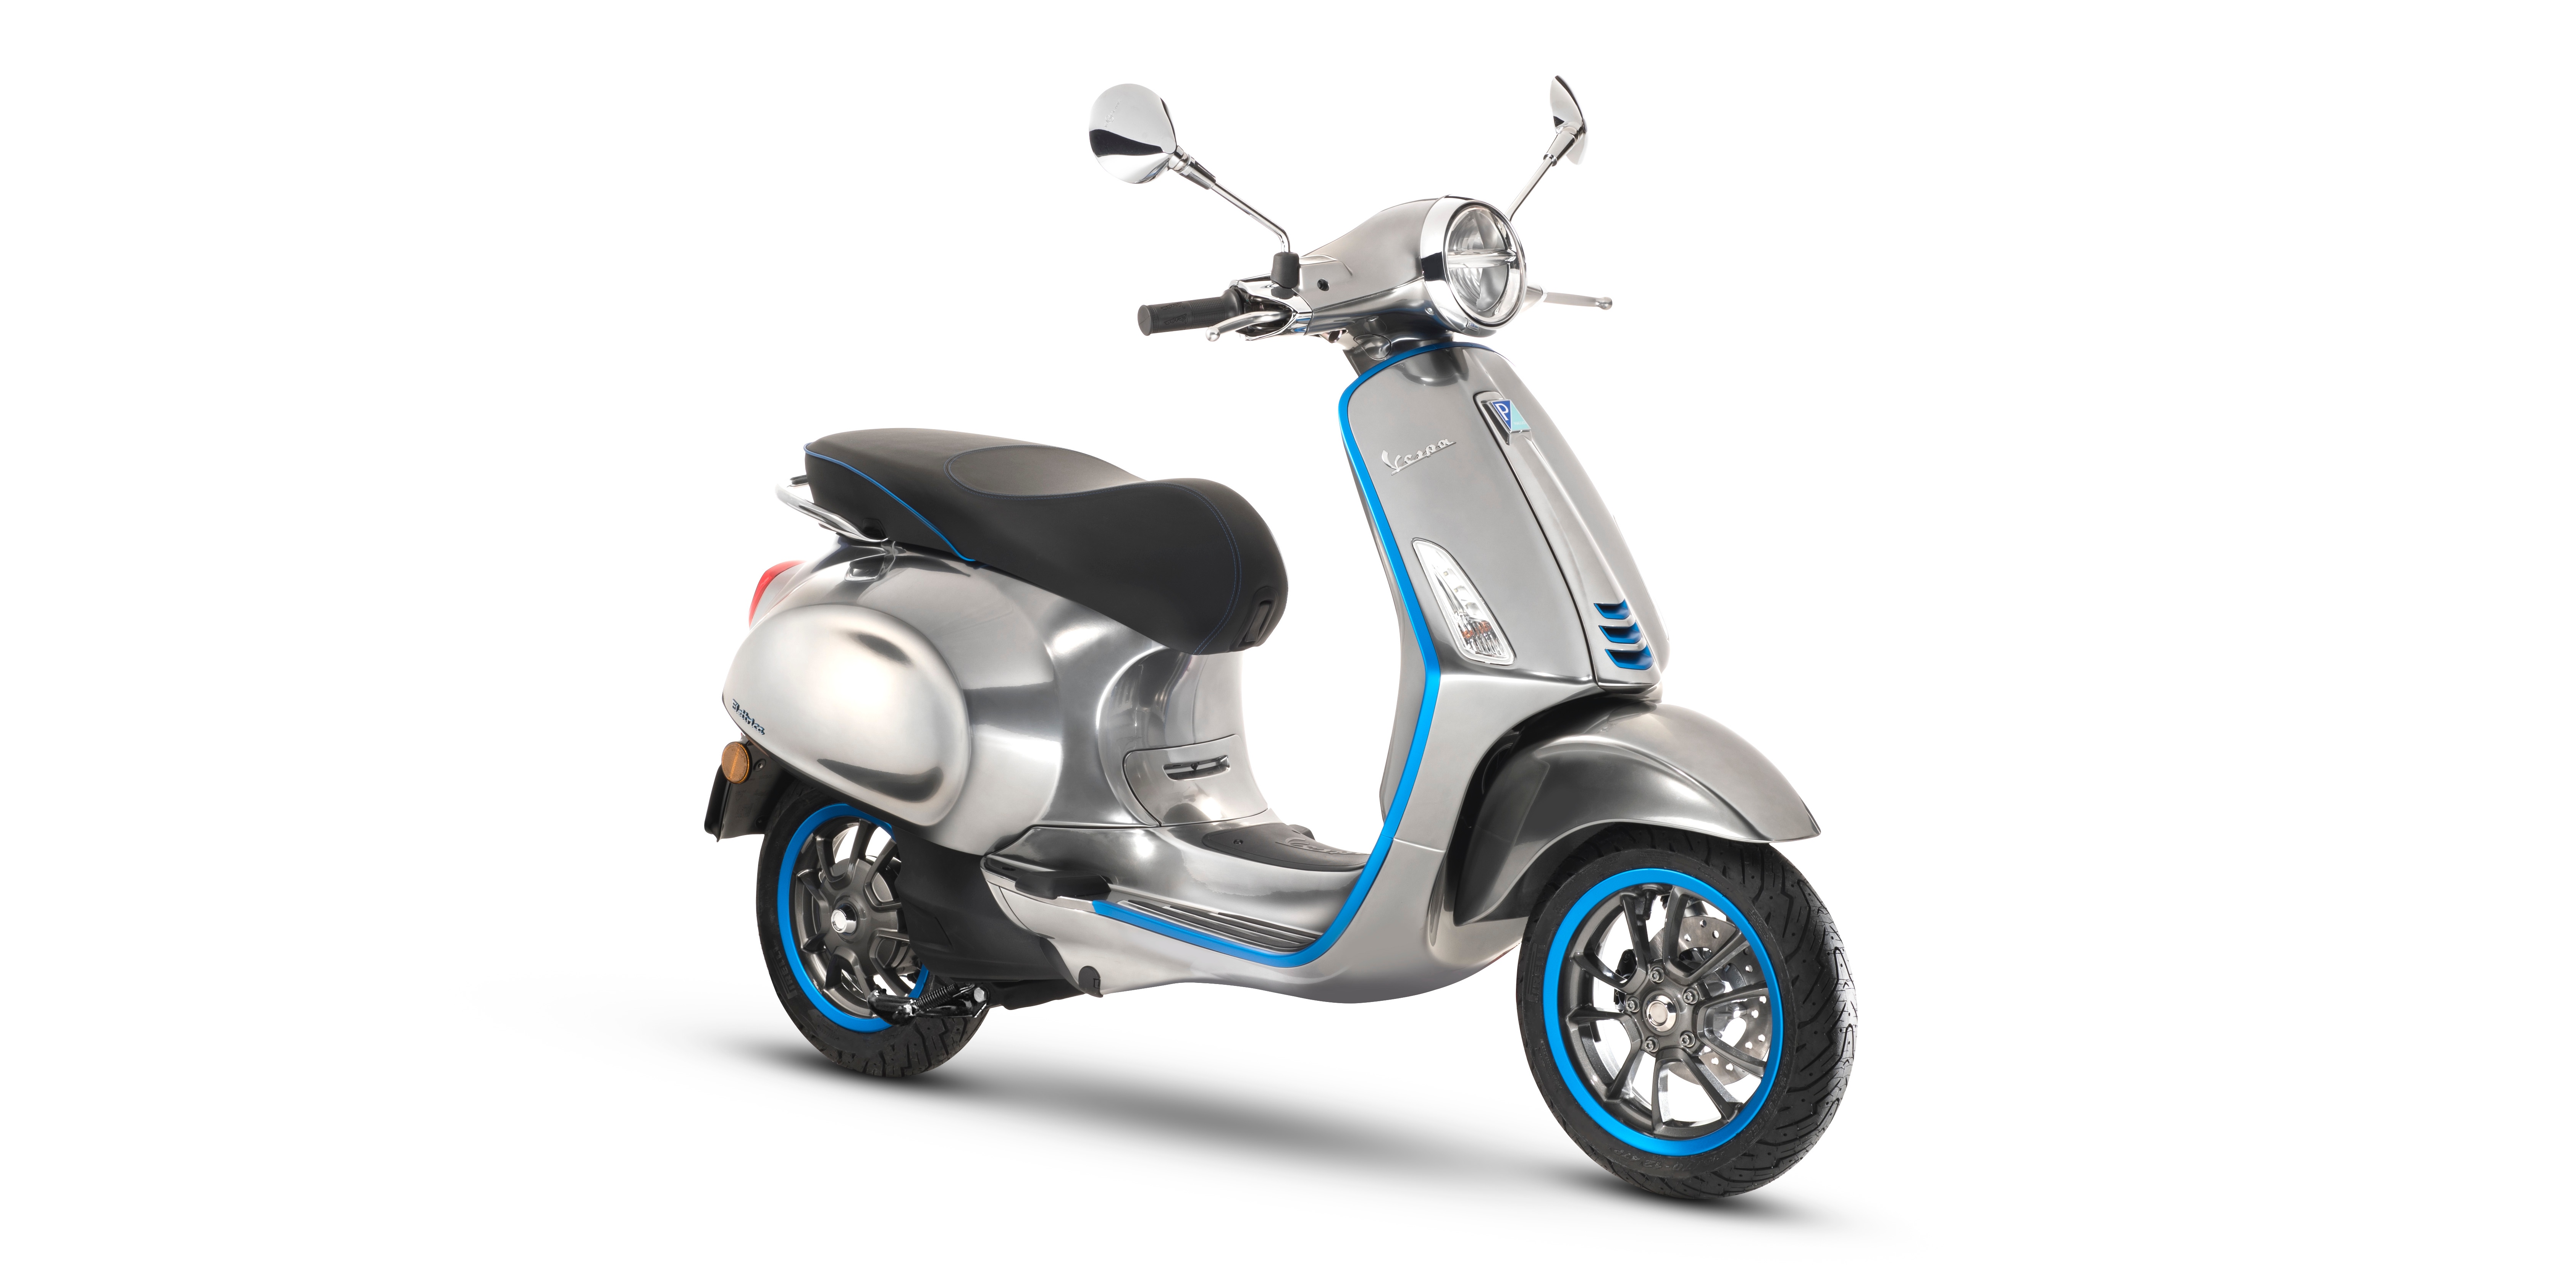 Piaggio boosts the electric Vespa's top speed... to a whopping 70 km/h